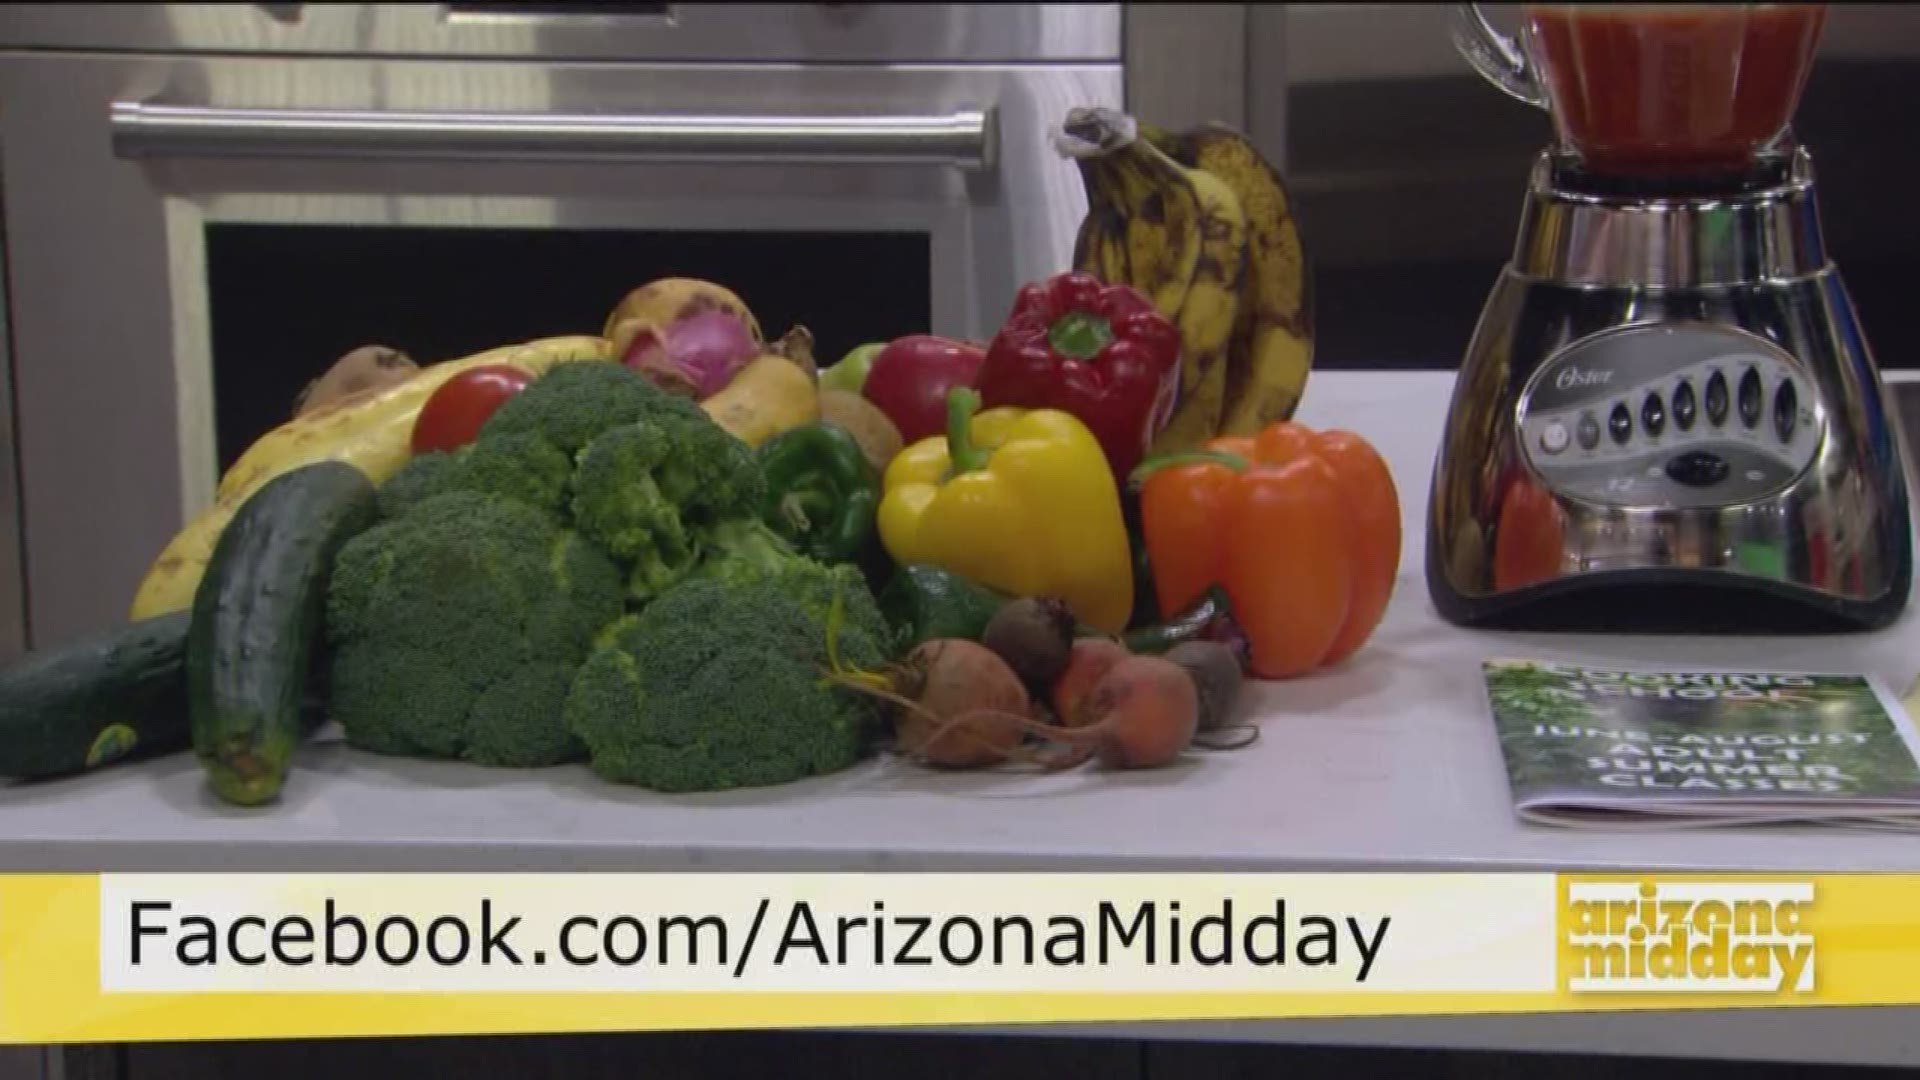 Pam Giannonatti and Chef Omei Eaglerider from Fry's Food Stores shows us how to make a delicious frittata and shares about their partnership with United Food bank for Summer of a Million Meals